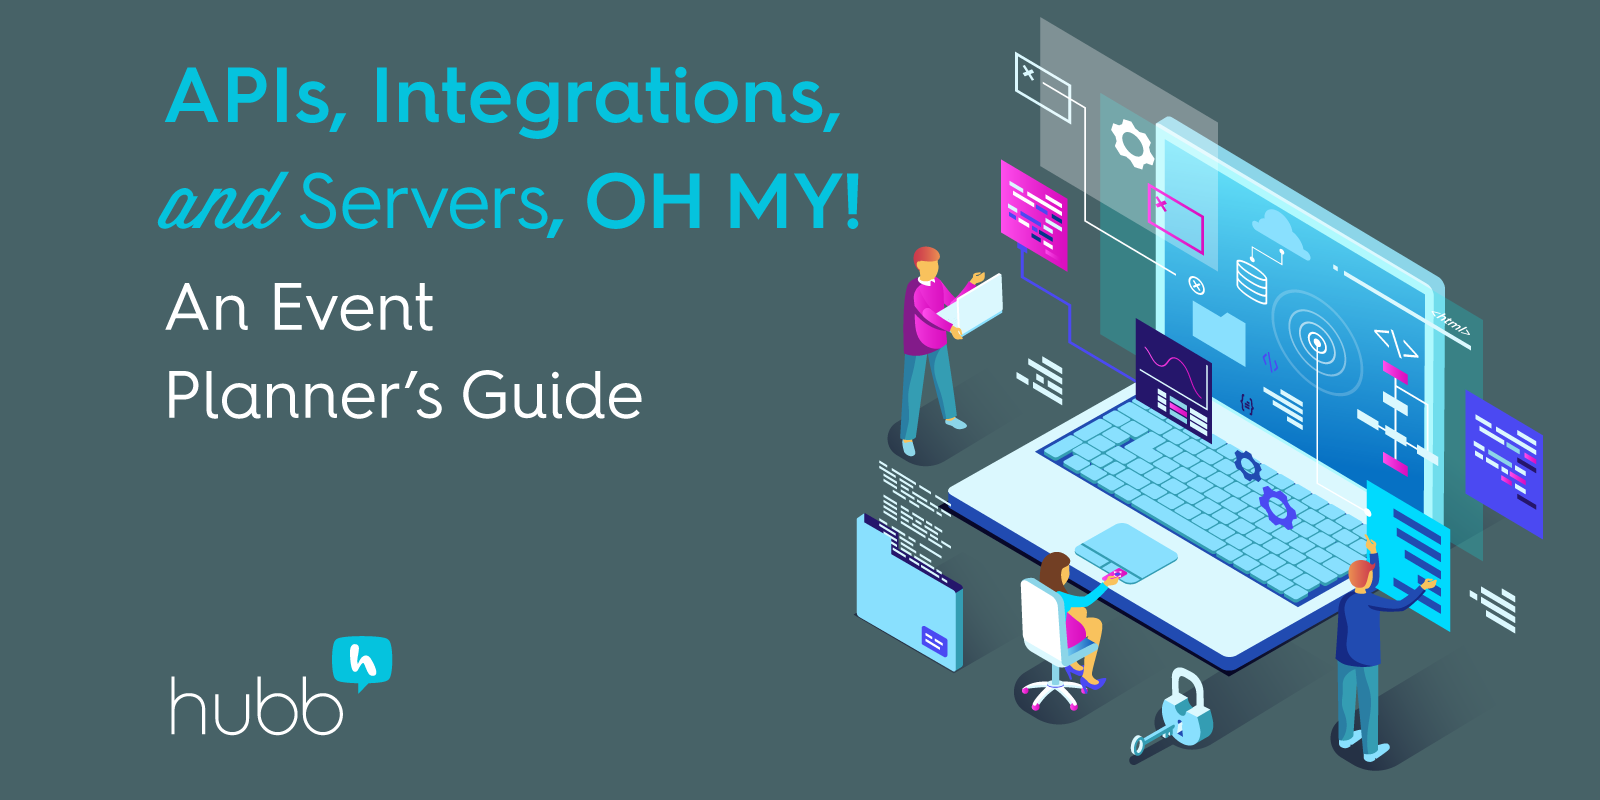 APIs, Integrations, and Servers, OH MY! An Event Planner’s Guide